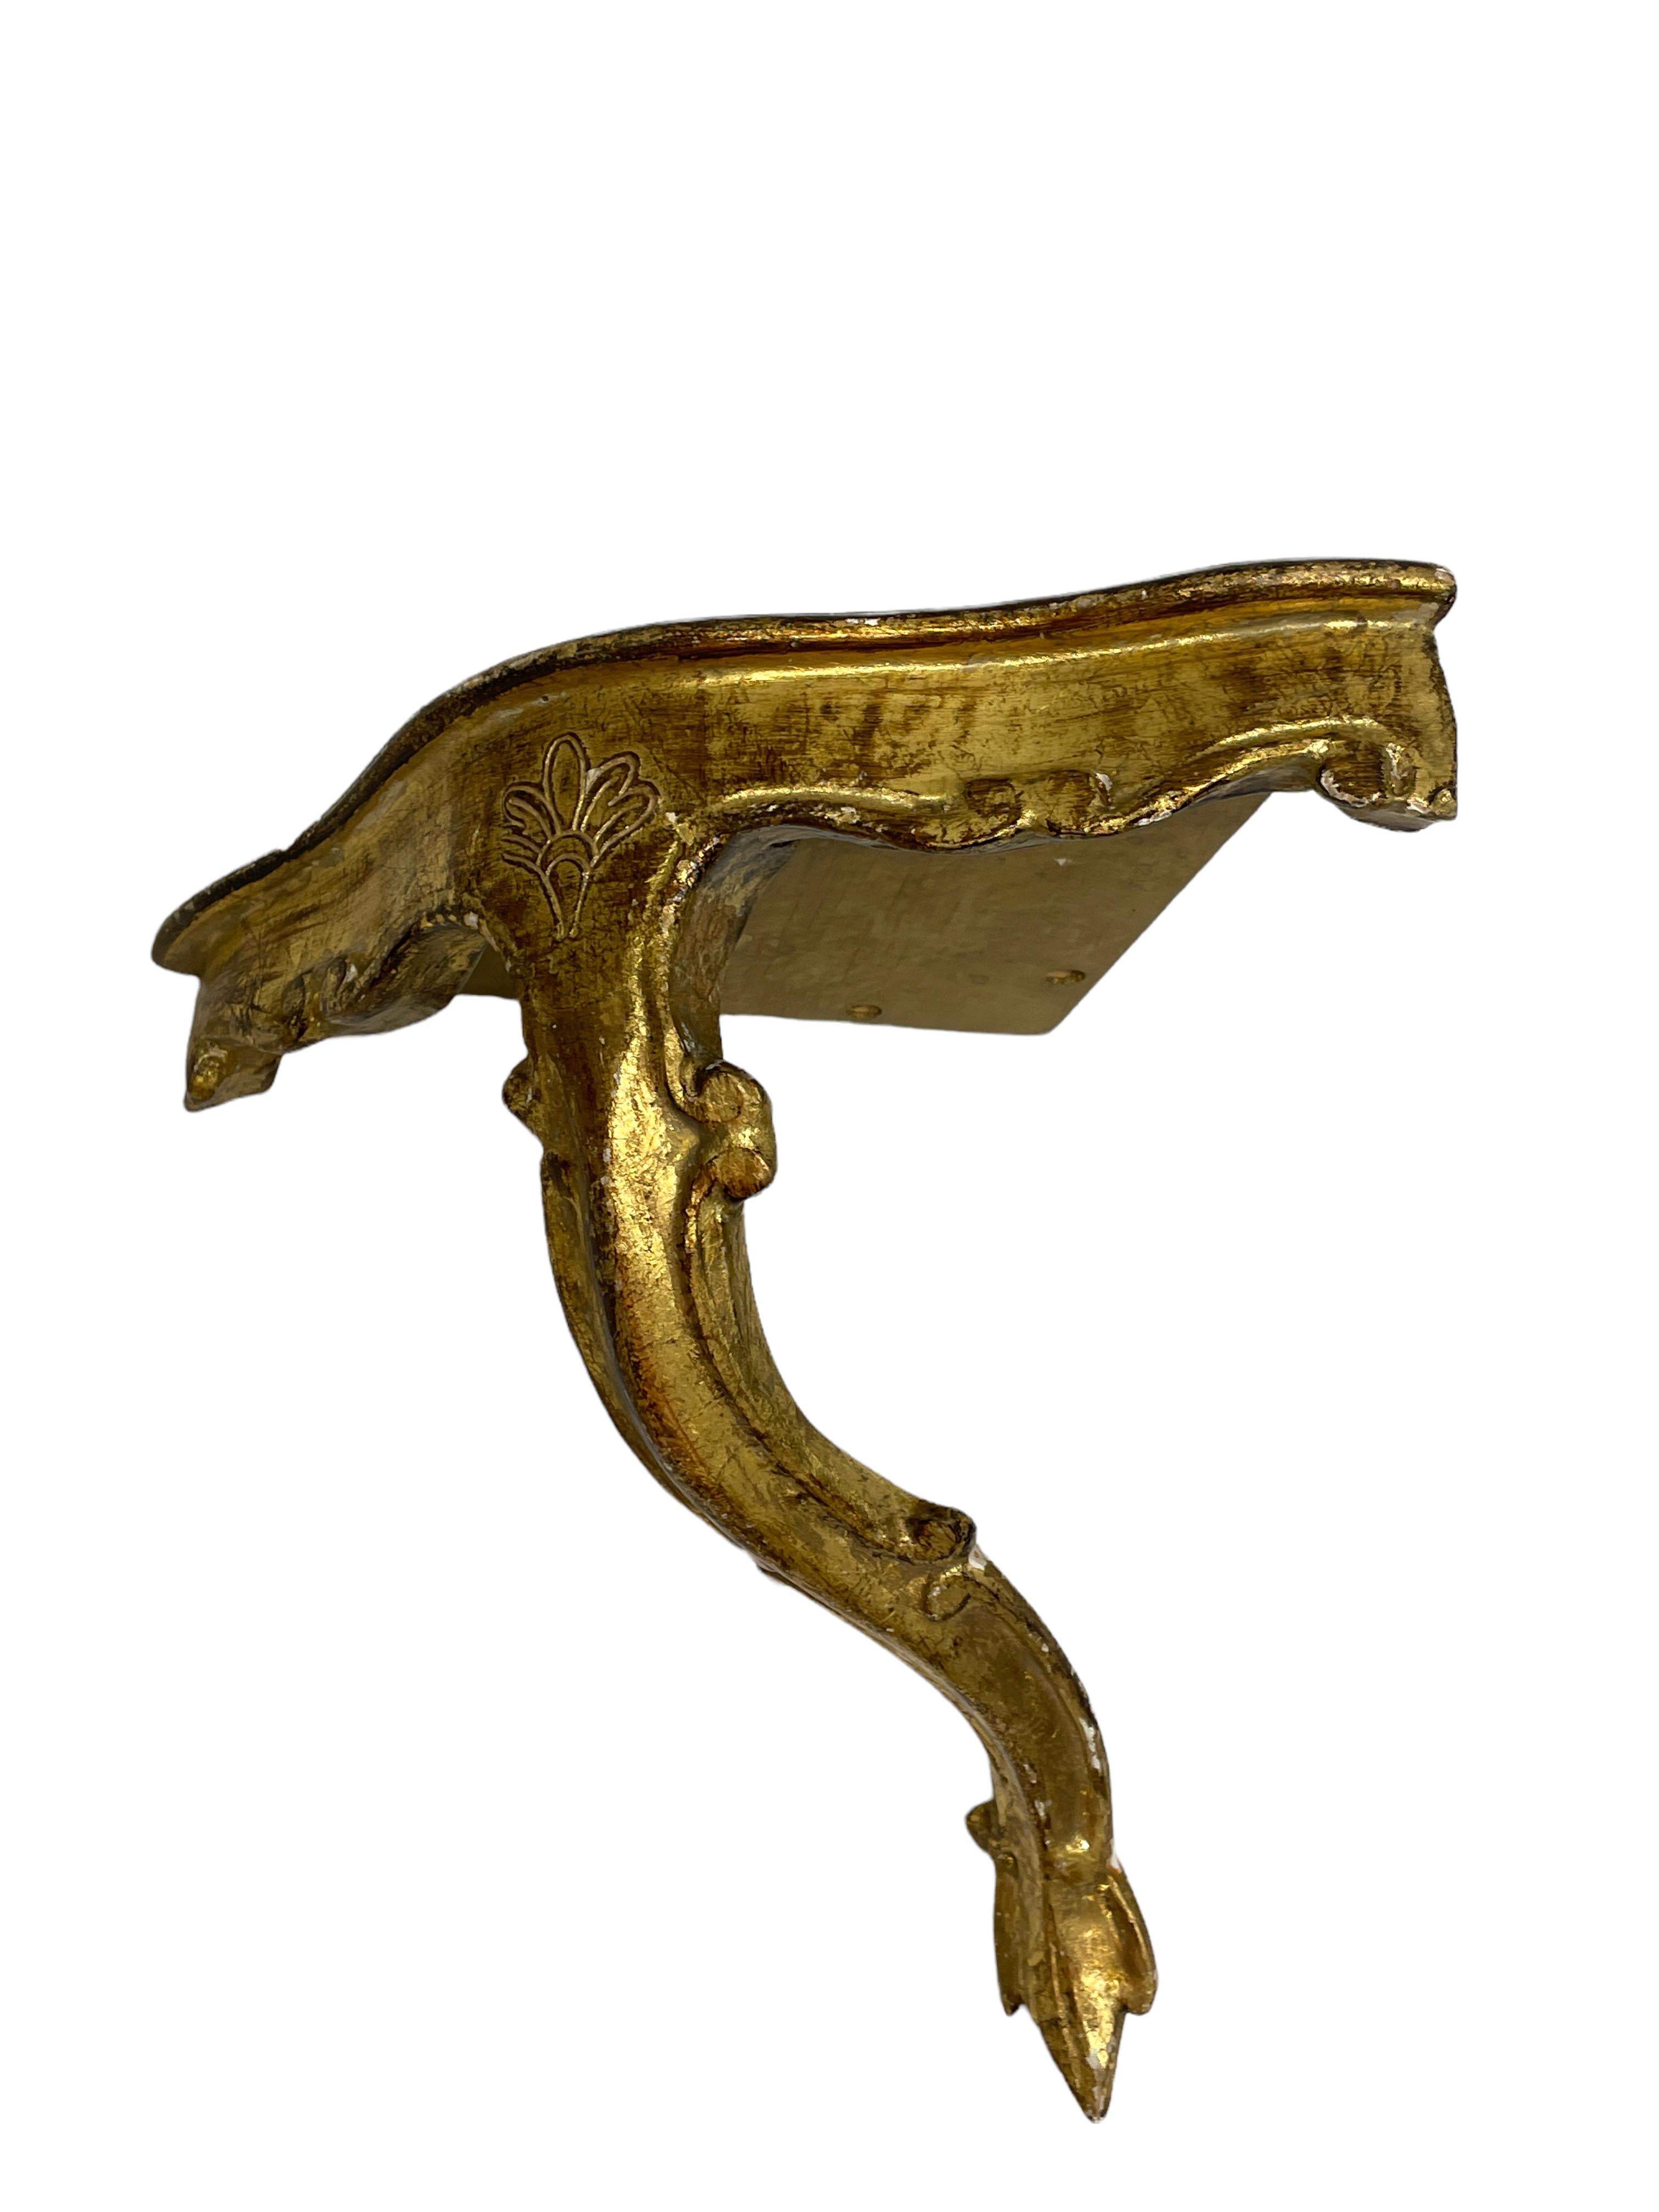 Italian Vintage Florence Wall Corner Shelf Console, Gilded Carved Wood, Florentine Style For Sale